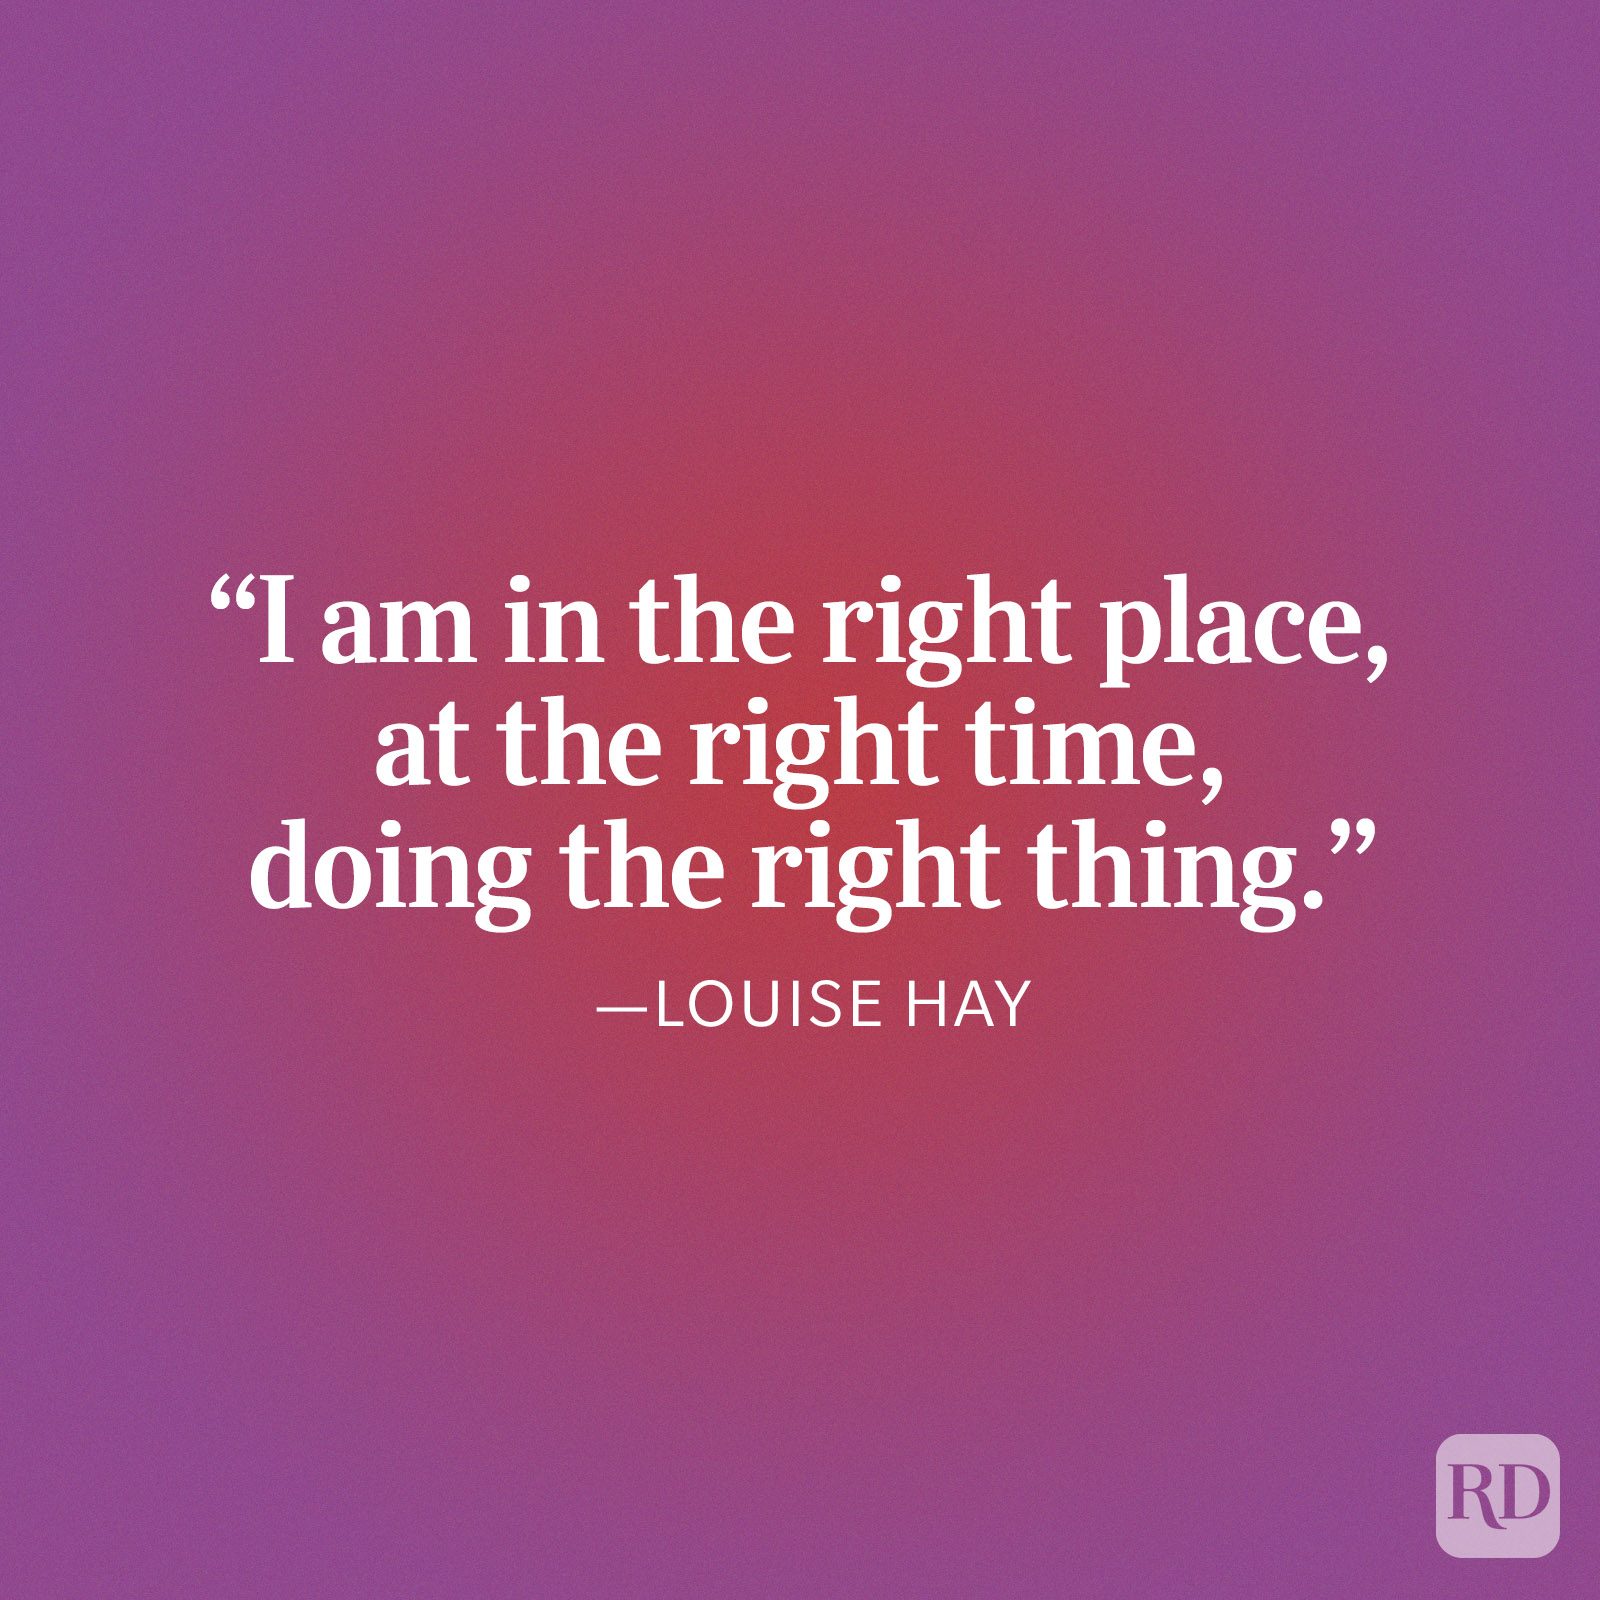 Louise Hay Positive Affirmation